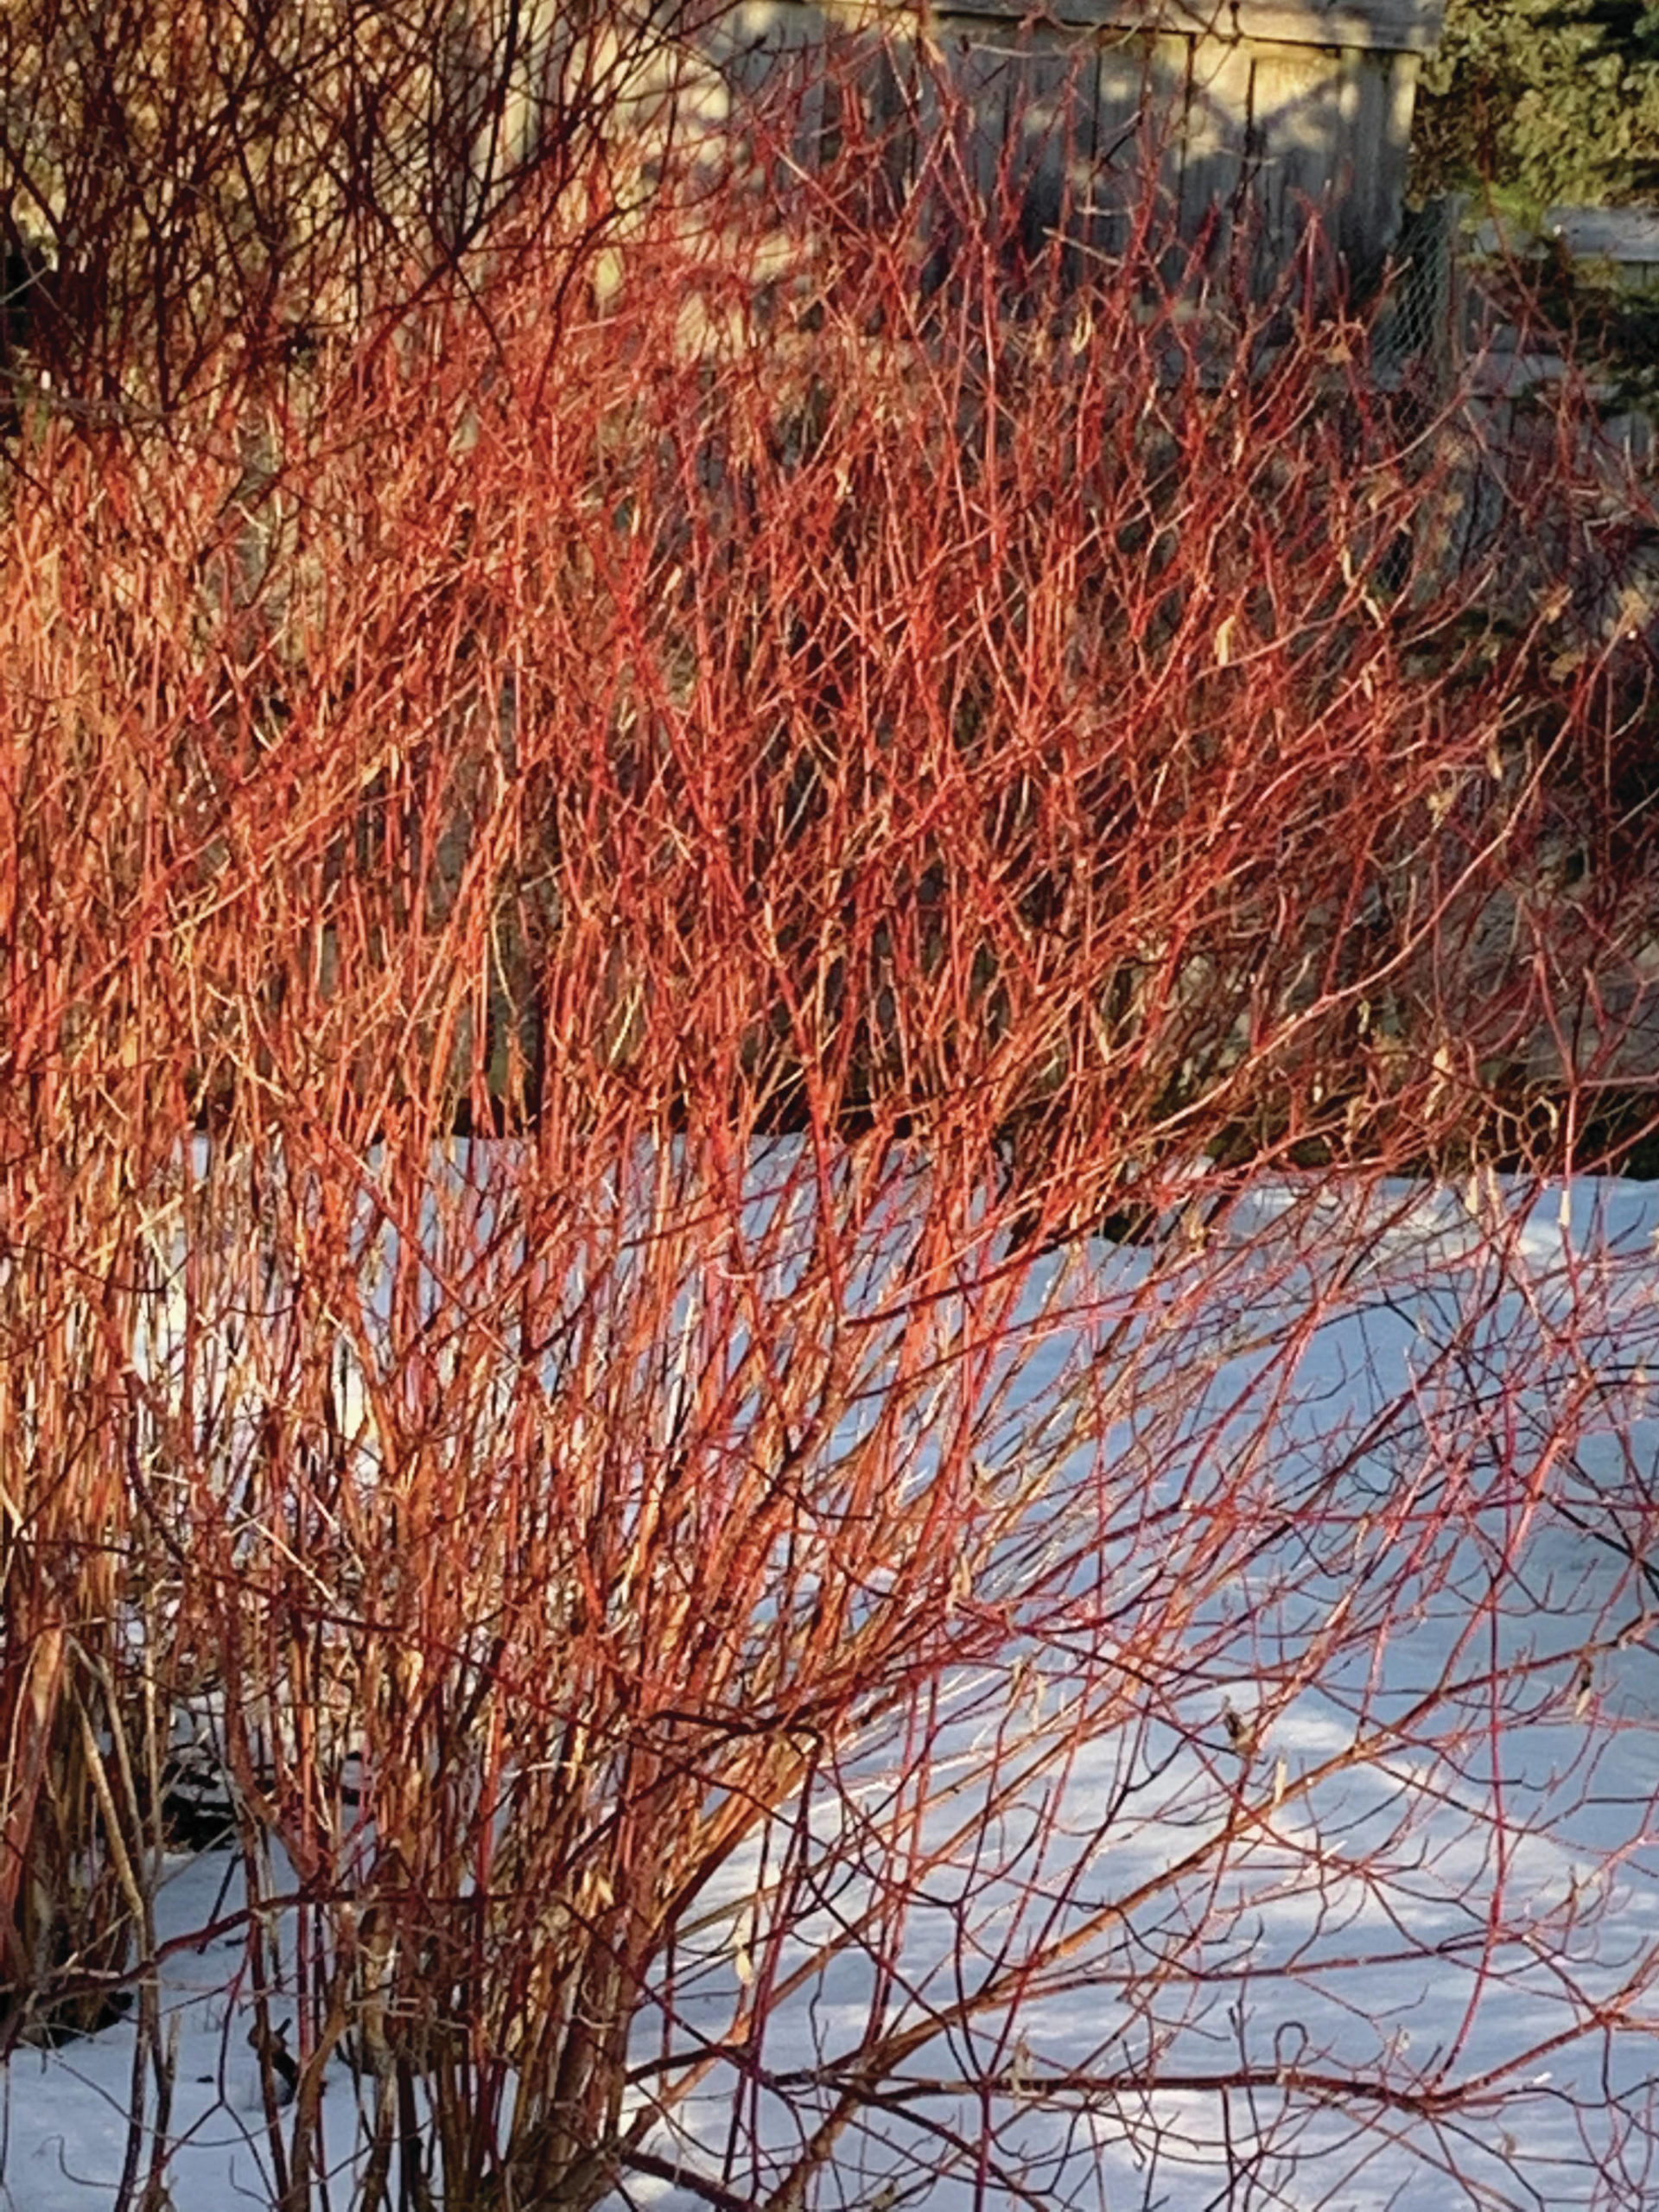 Red twig dogwood doing what it does best on a sunny afternoon on Feb. 17, 2021, at the Kachemak Gardener’s home in Homer, Alaska. (Photo by Rosemary Fitzpatrick)